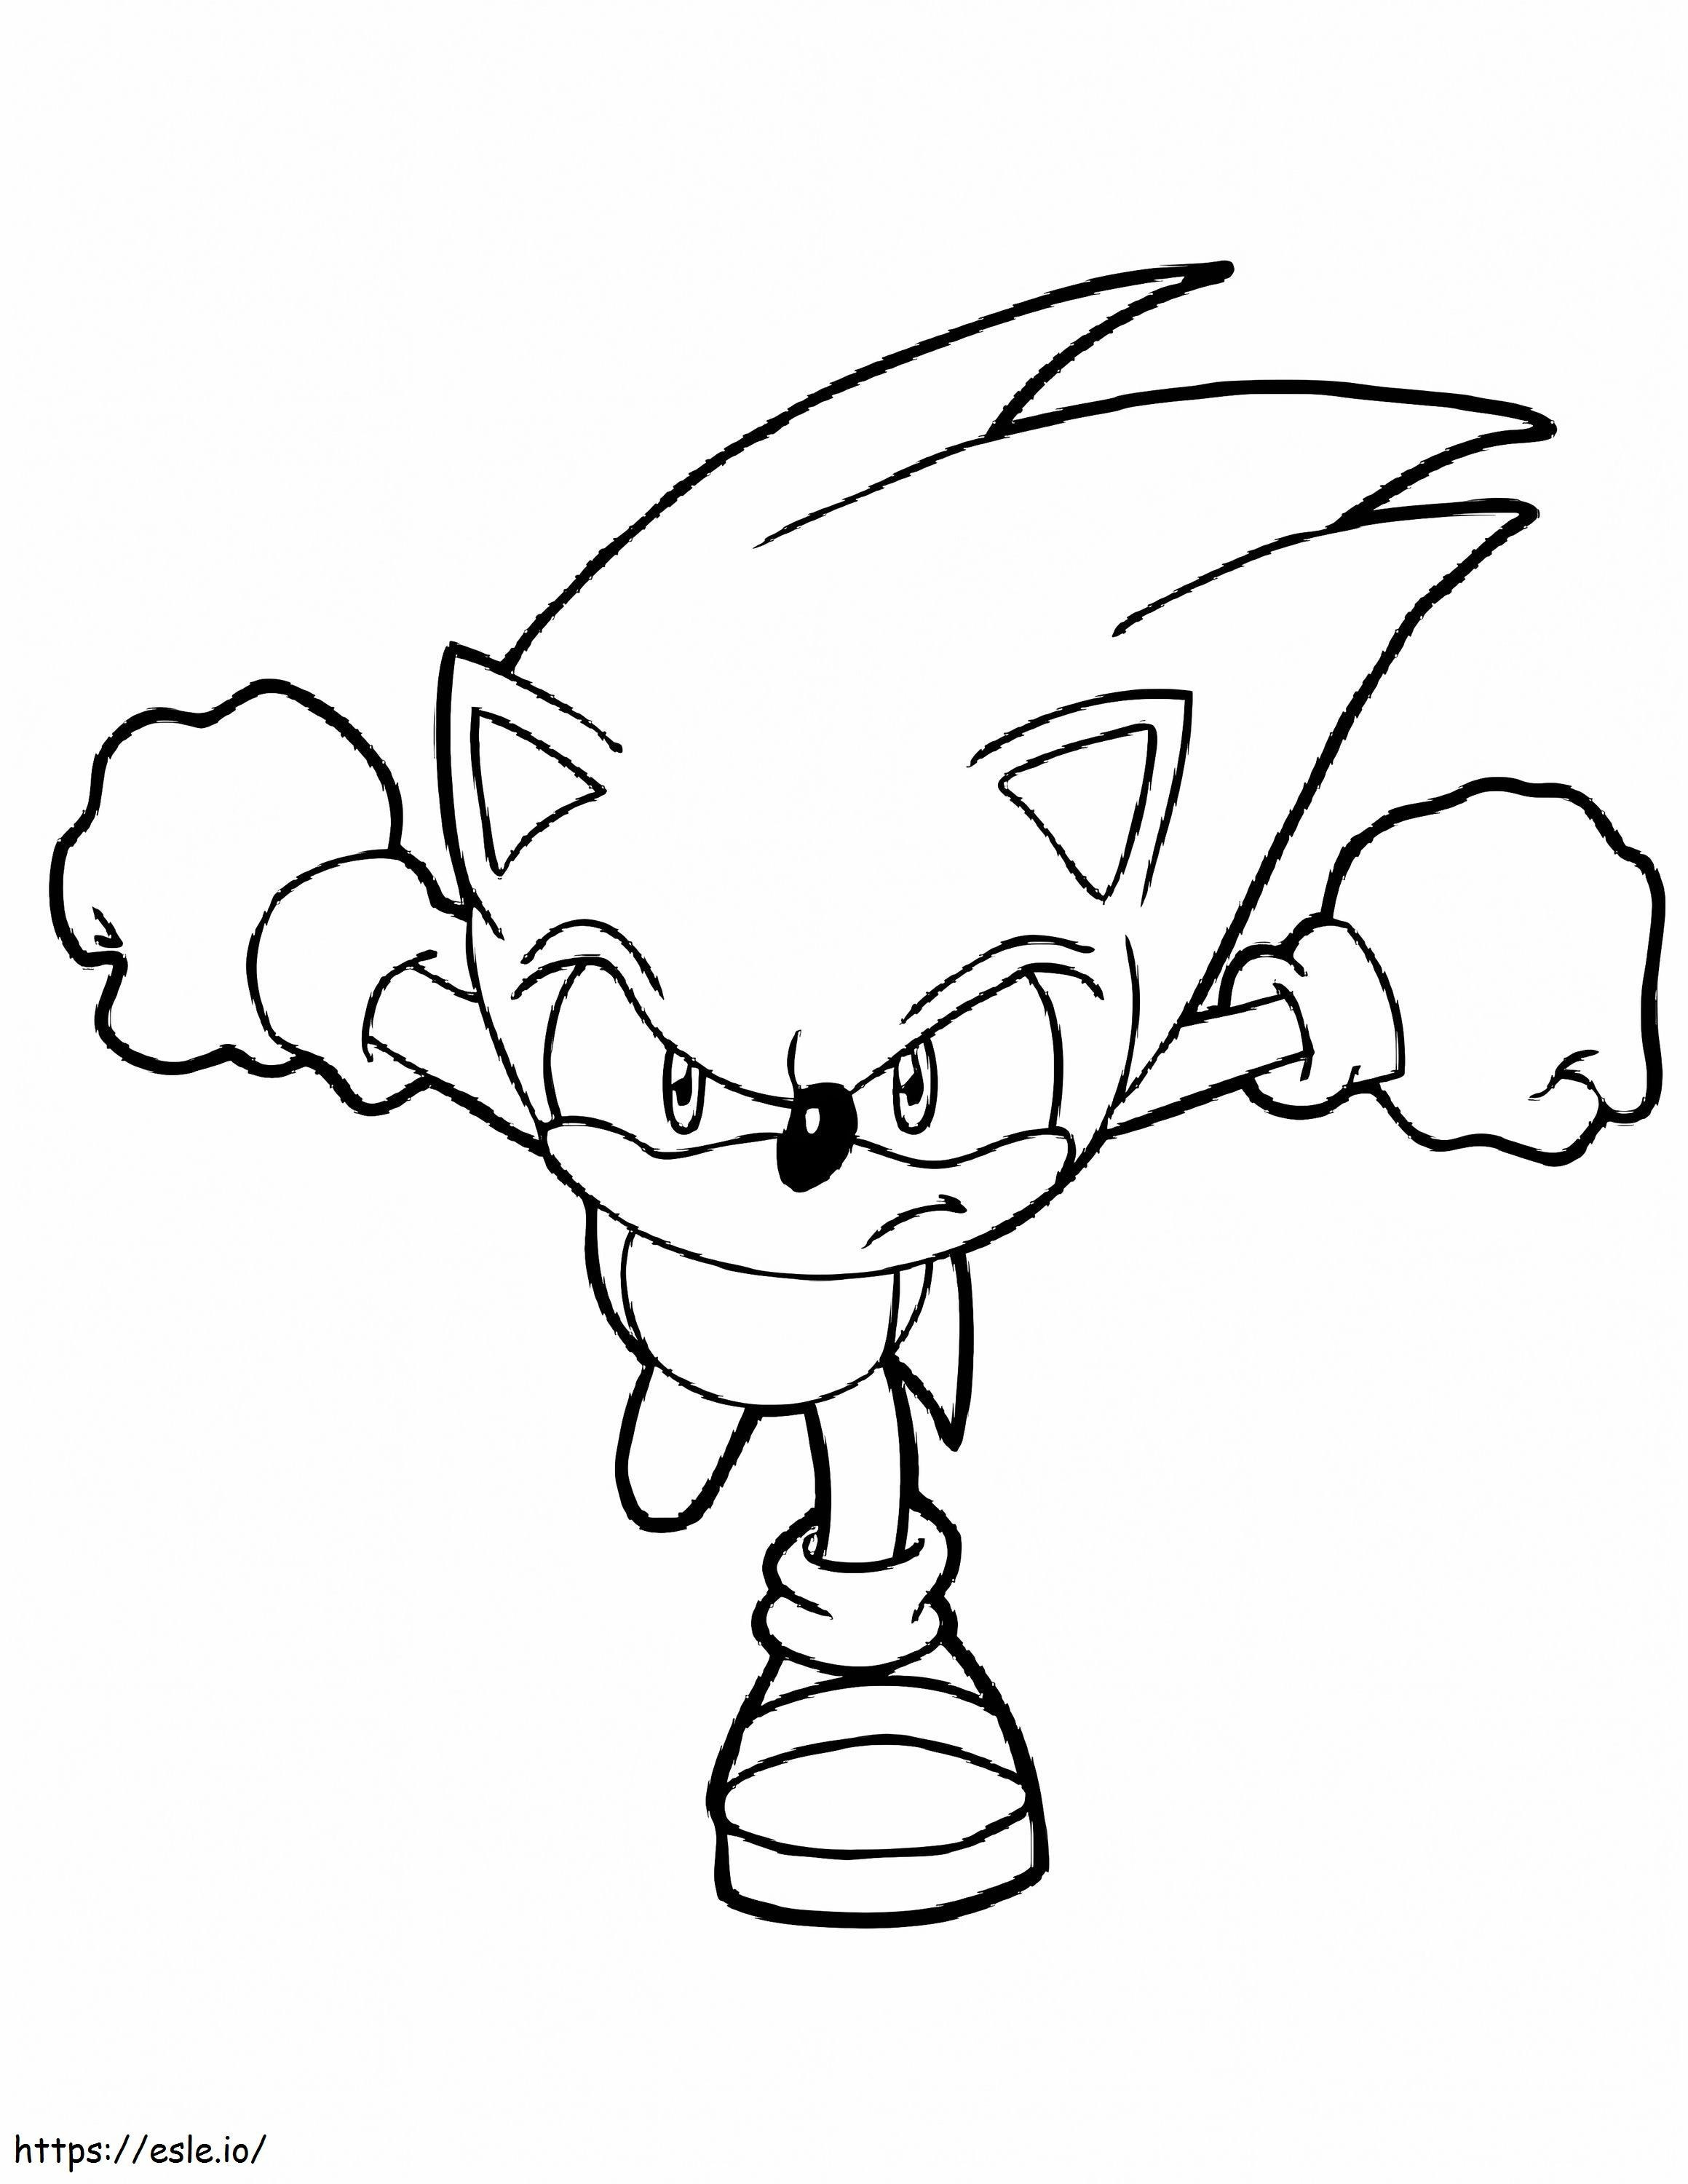 Super Fast Sonic coloring page